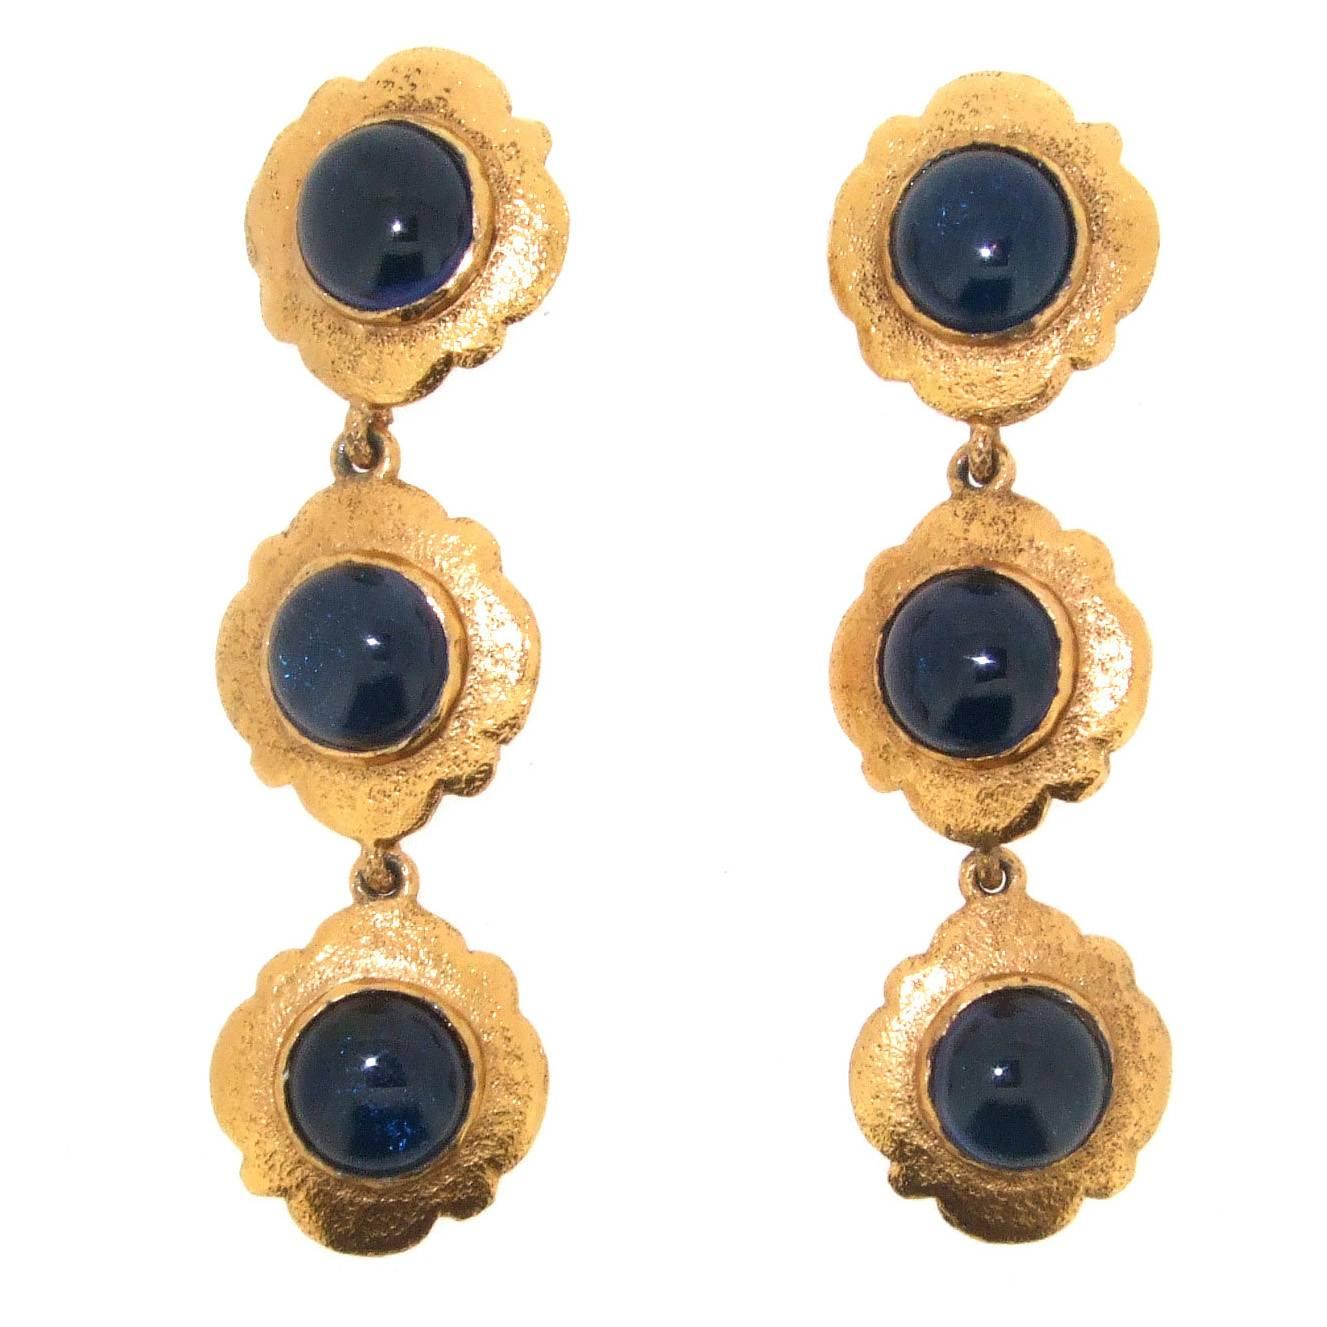 A pair of clip on chandelier earrings by Chanel with sapphire royal blue glass set in gold plated metal. 

The stamp dates the earrings to collection 25 by Victoire De Castellane who was the head designer between 1986 and 1989. 